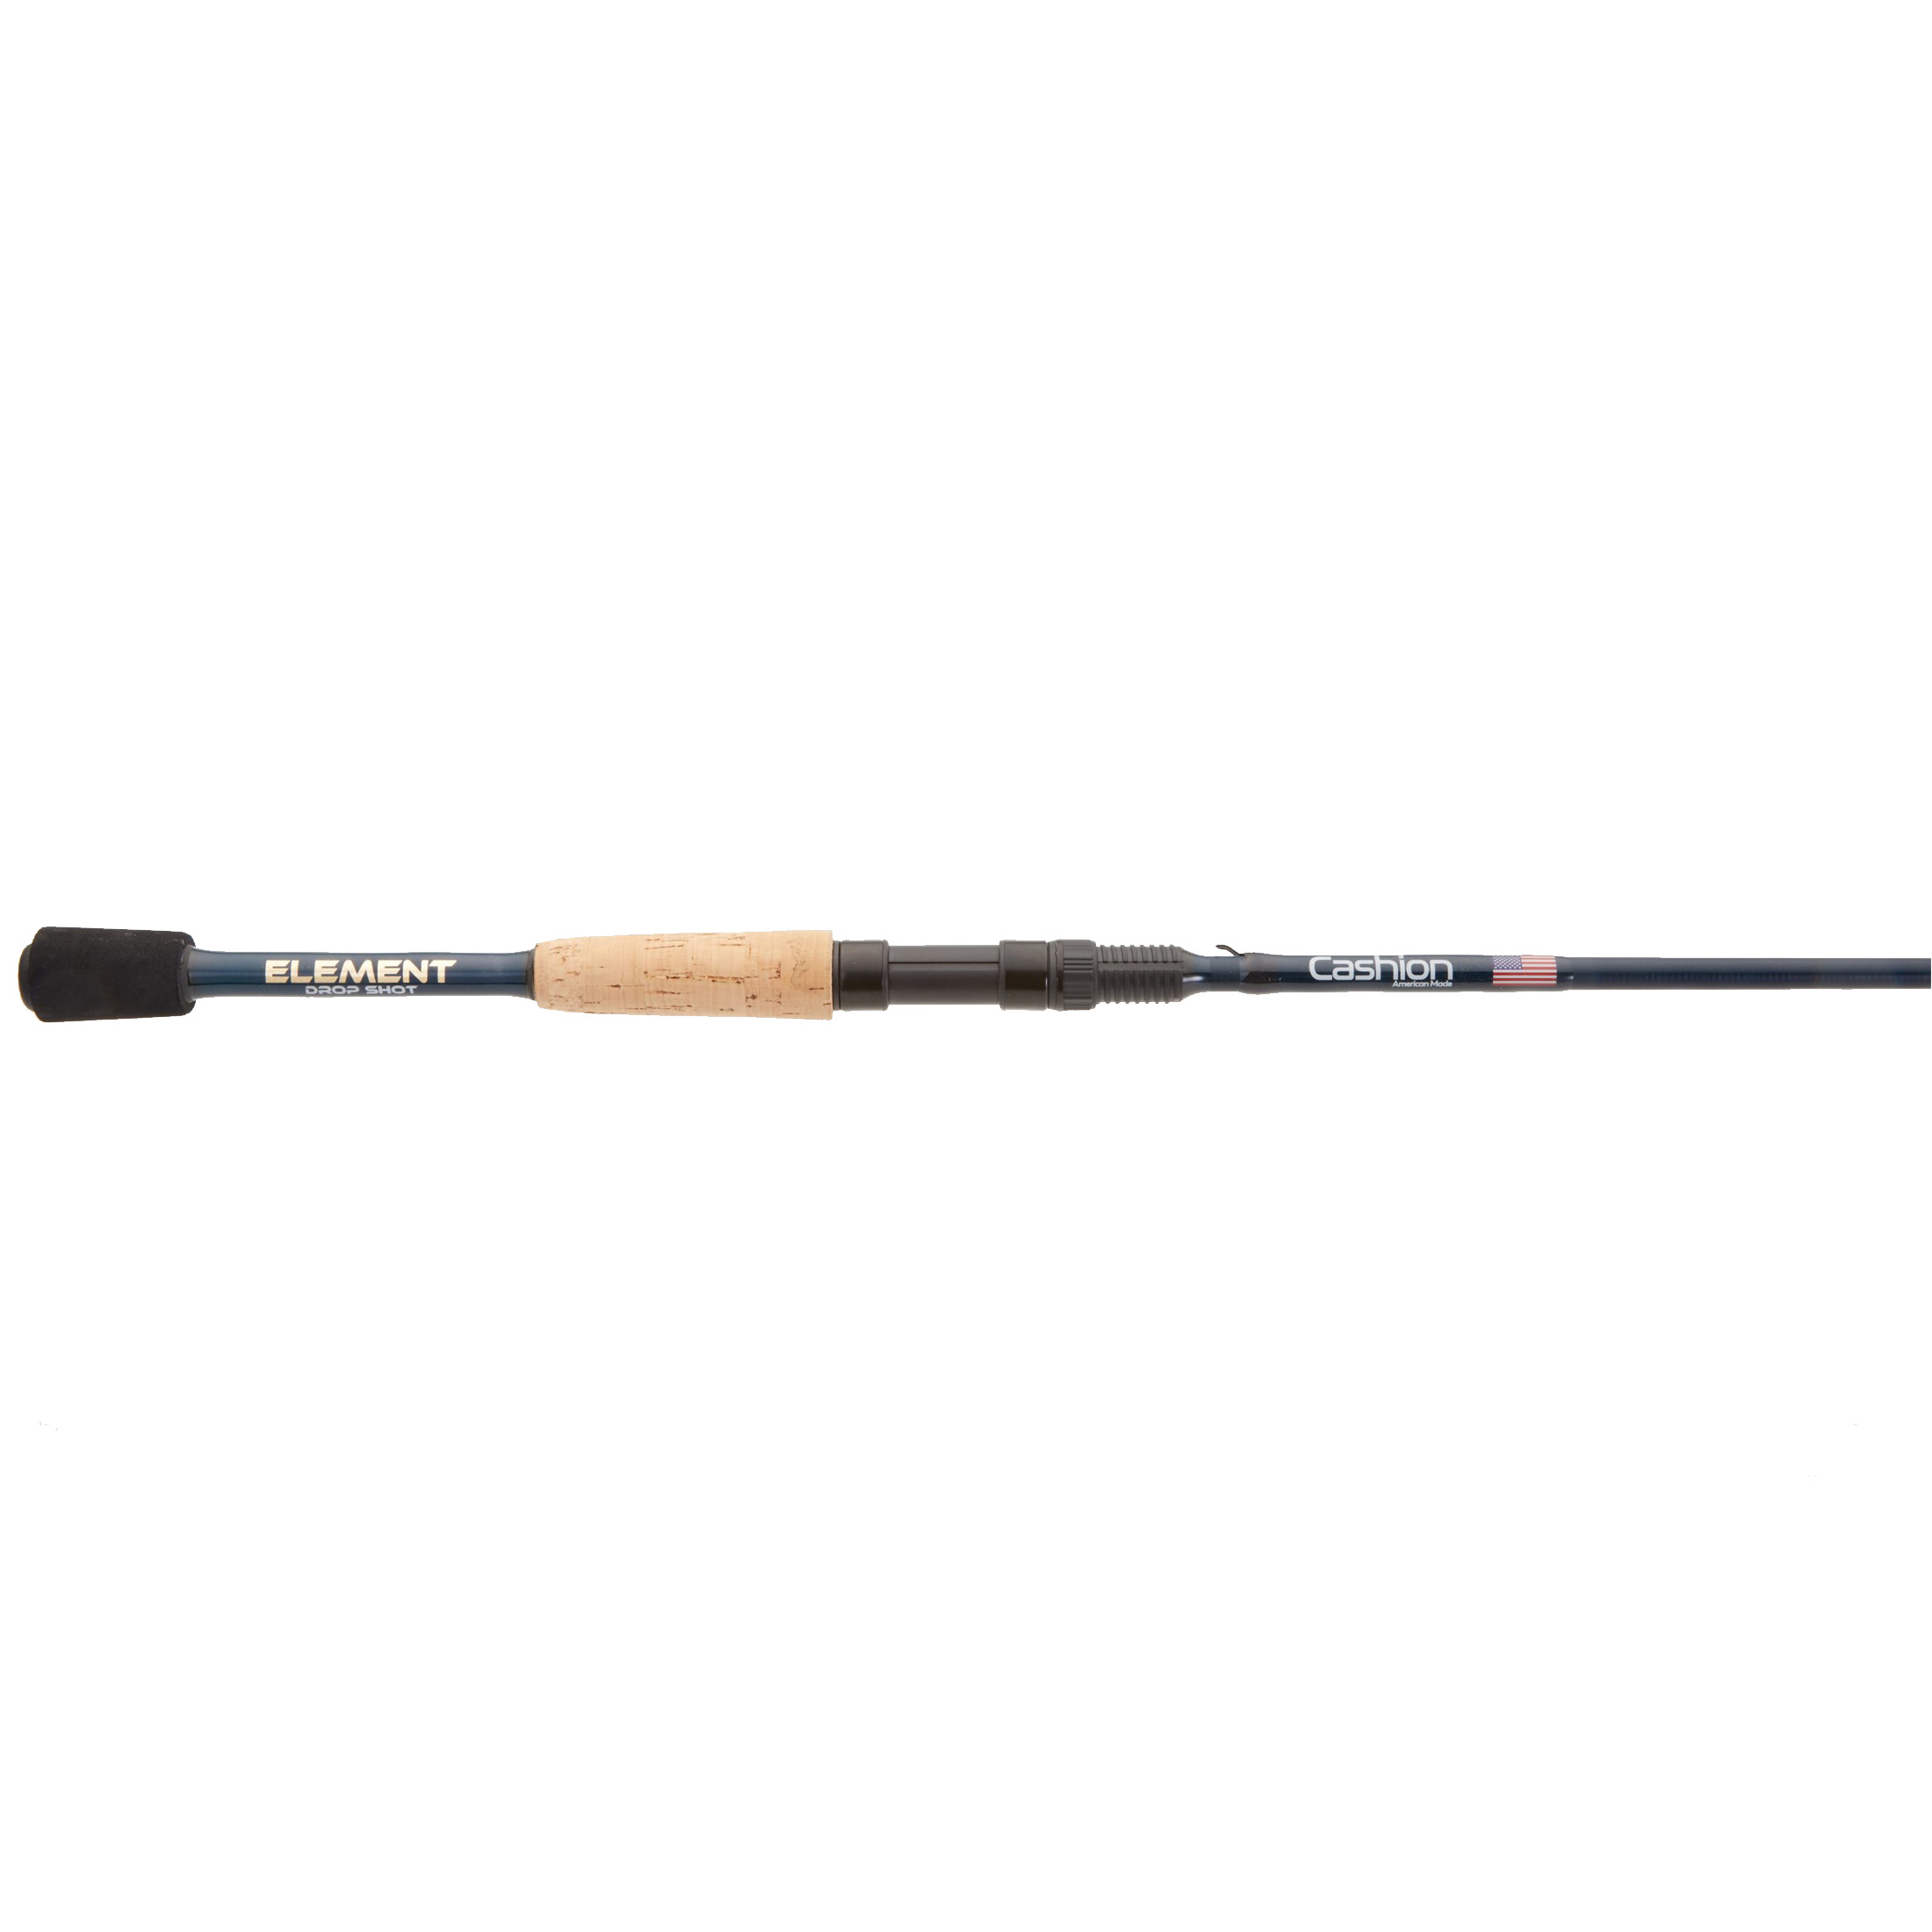 Cashion Rods Element Spinning Rods